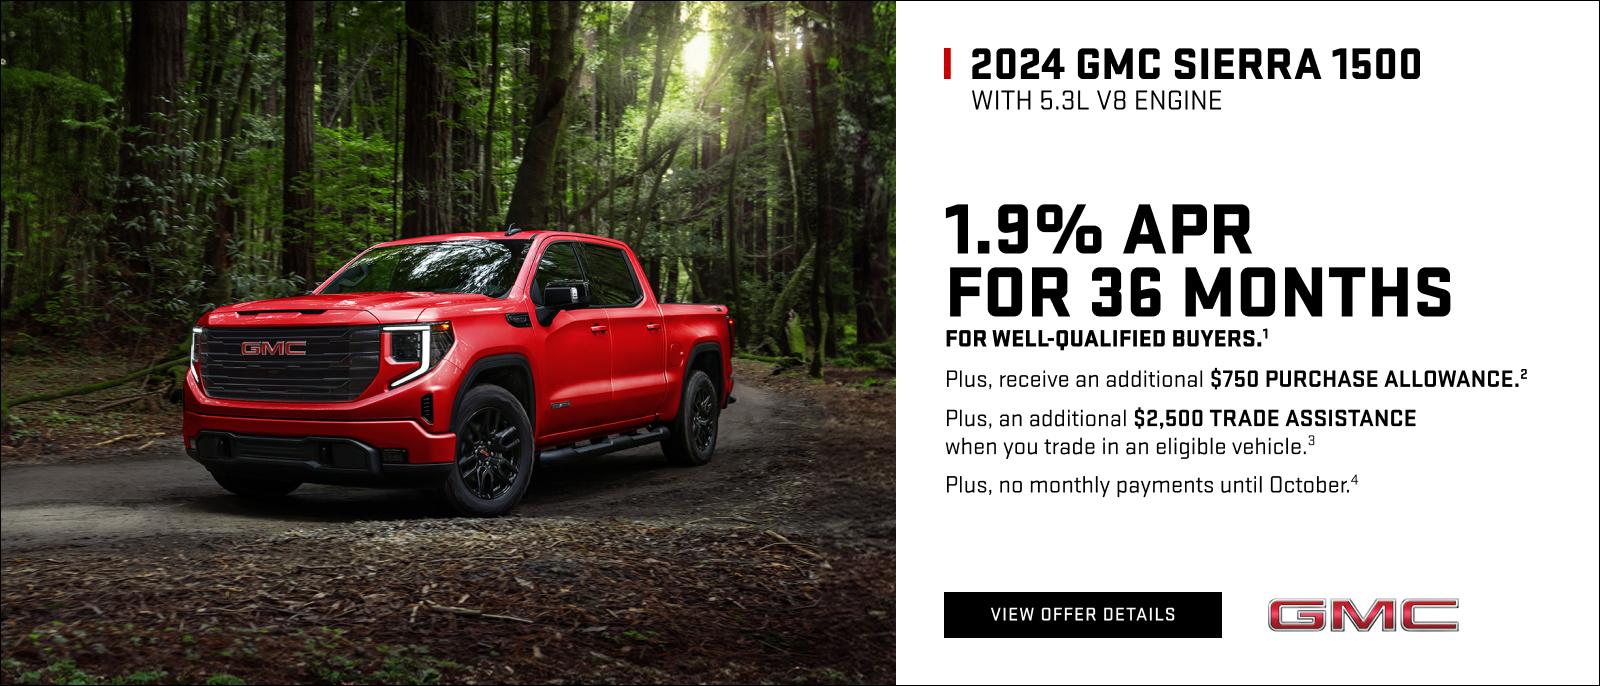 1.9% APR FOR 36 MONTHS for well-qualified buyers.1

Plus, receive an additional $750 PURCHASE ALLOWANCE.2

Plus, an additional $2,500 TRADE ASSISTANCE when you trade in an eligible vehicle.3

Plus, no monthly payments until October.4